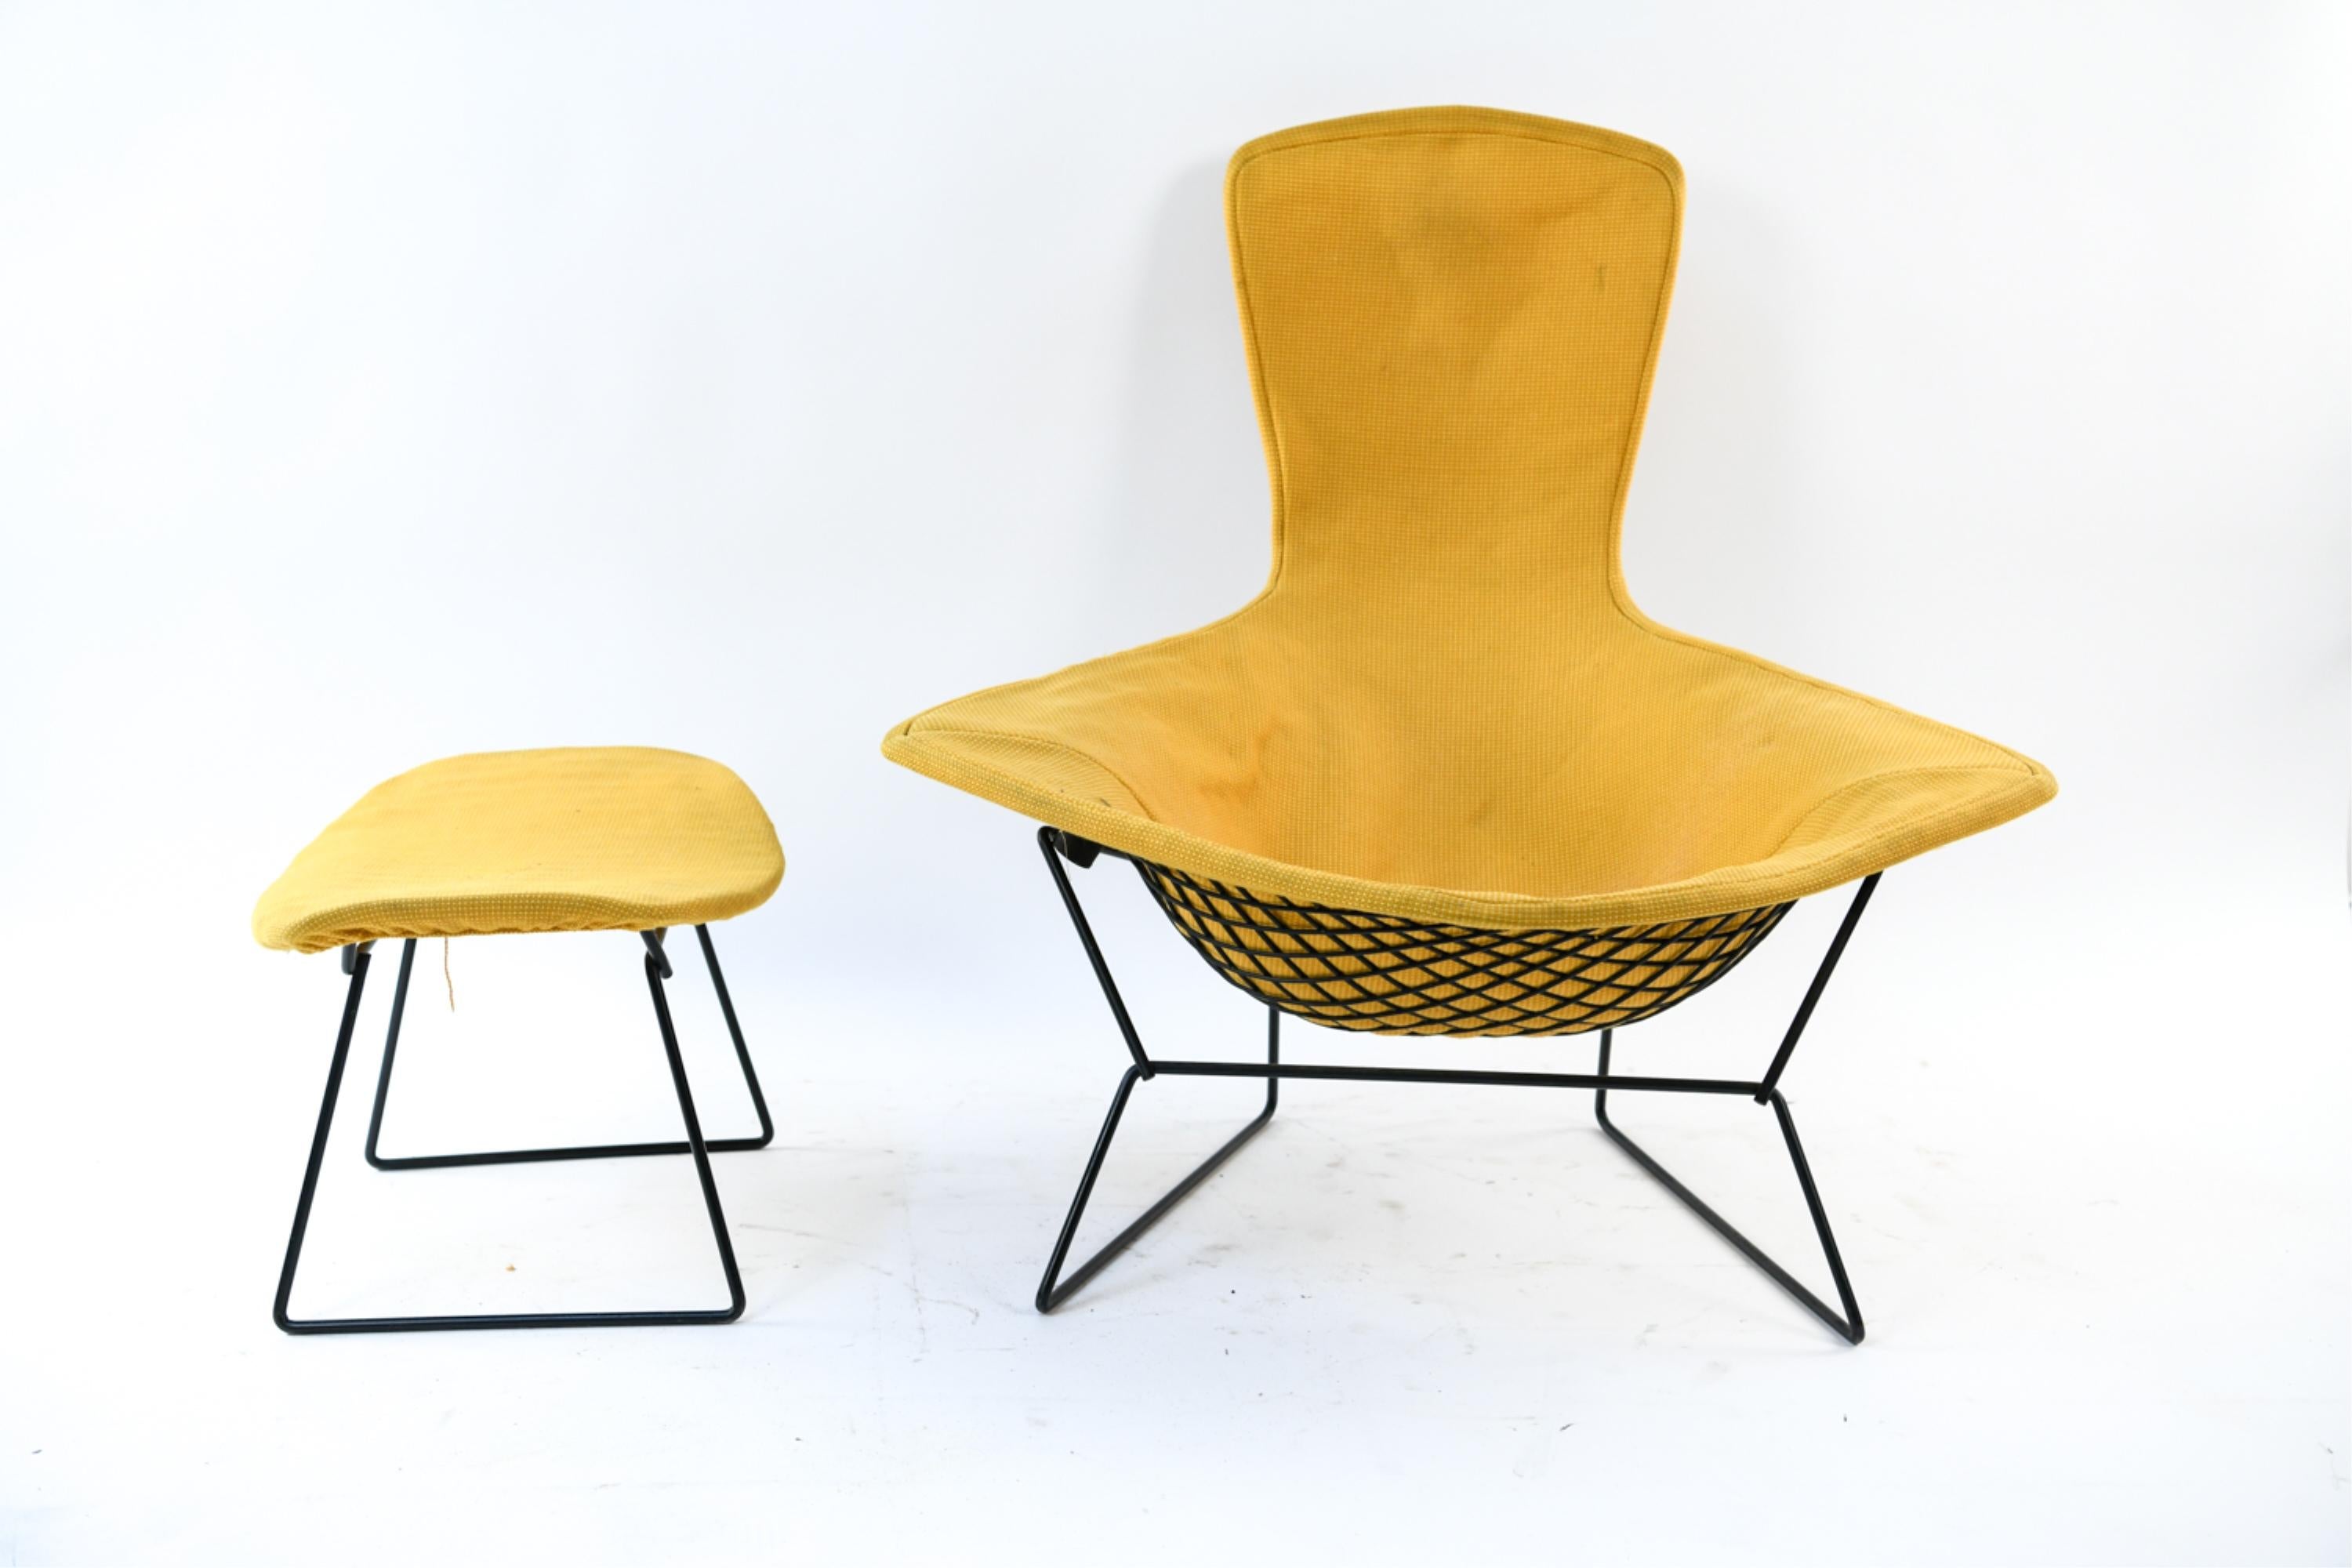 This is an example of an iconic design by Harry Bertoia for Knoll, circa 1950s. The 